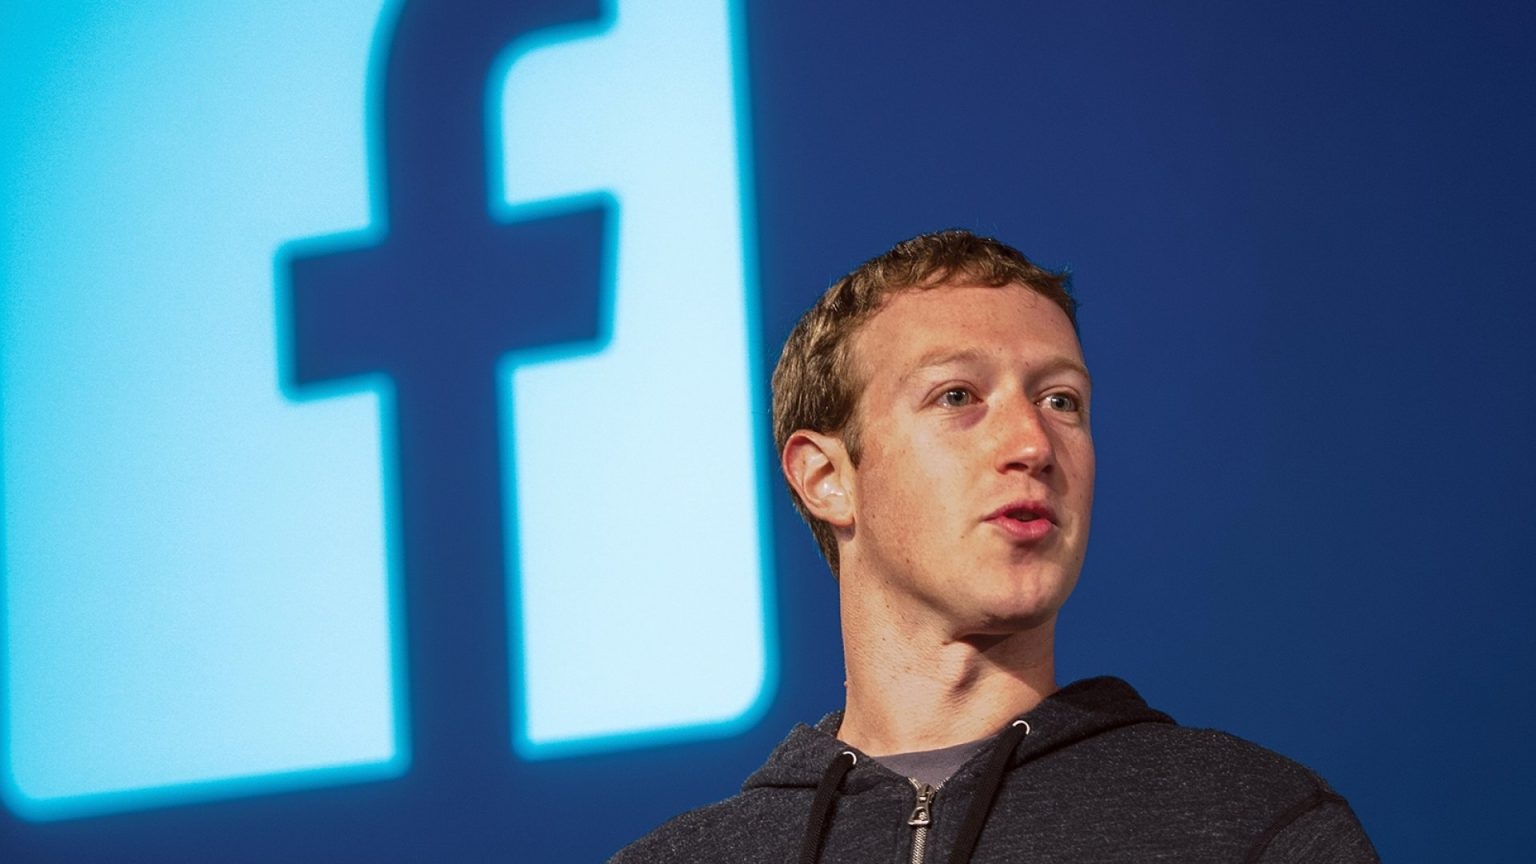 The total net worth of Mark Zuckerberg, CEO and co-founder of Meta